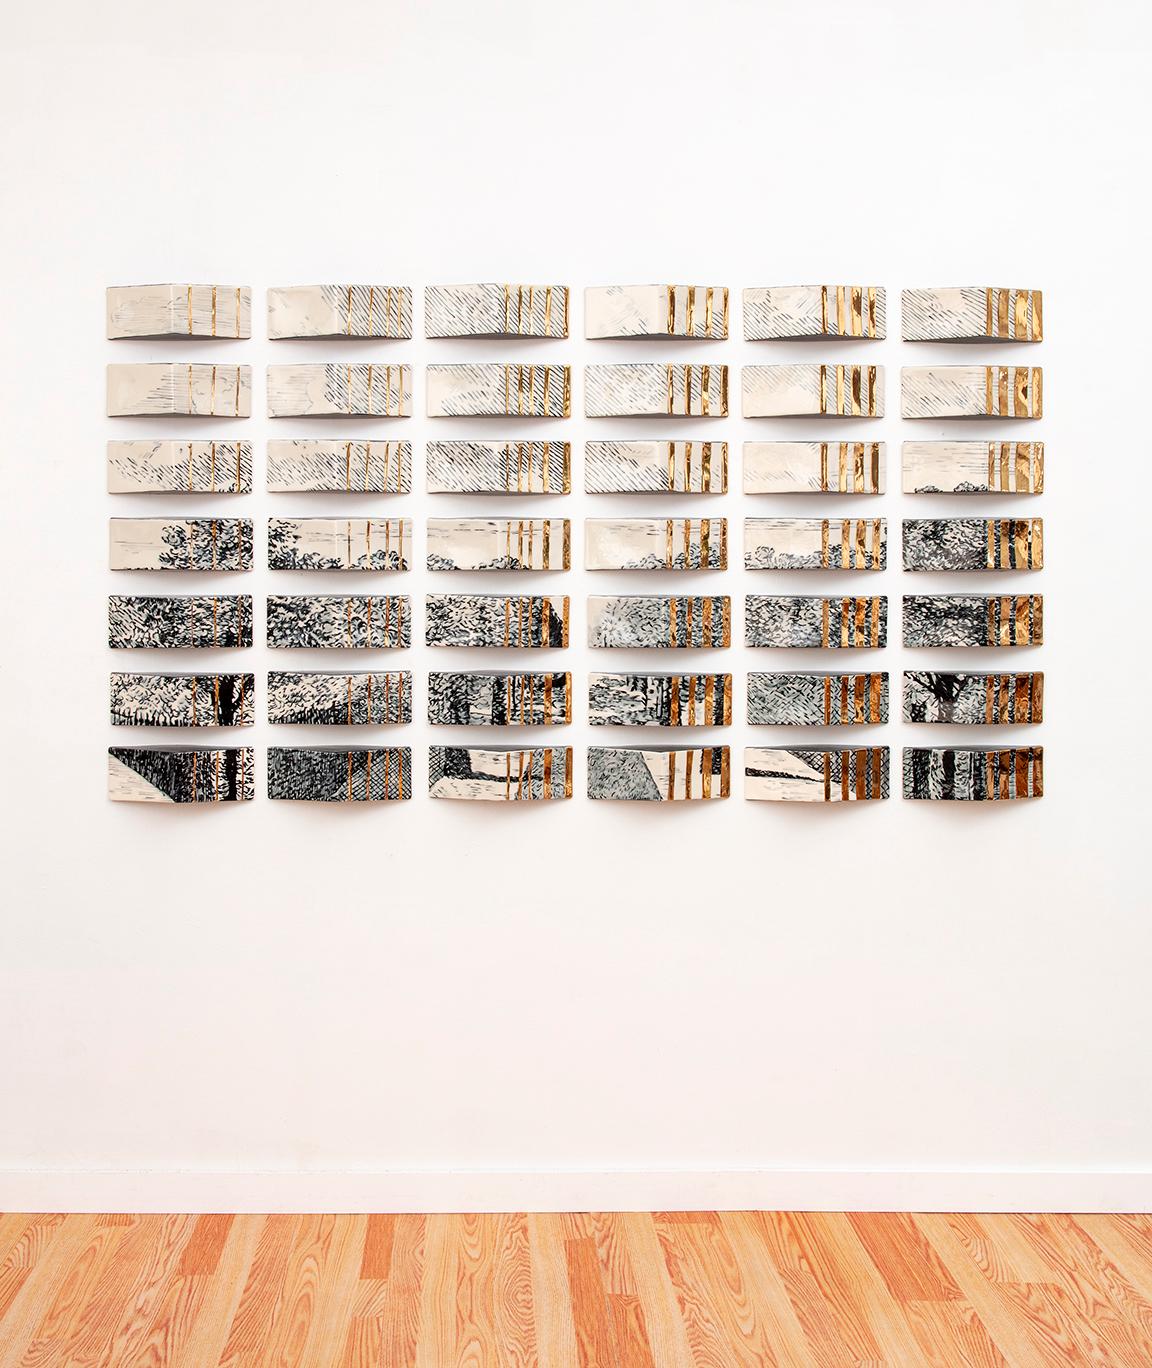 Molly Hatch’s latest installation, Parallel, continues her process of deconstructing historic imagery through an installation of triangular shaped wall tiles that create a large scale, three-dimensional ceramic lenticular. The graphic work, with its